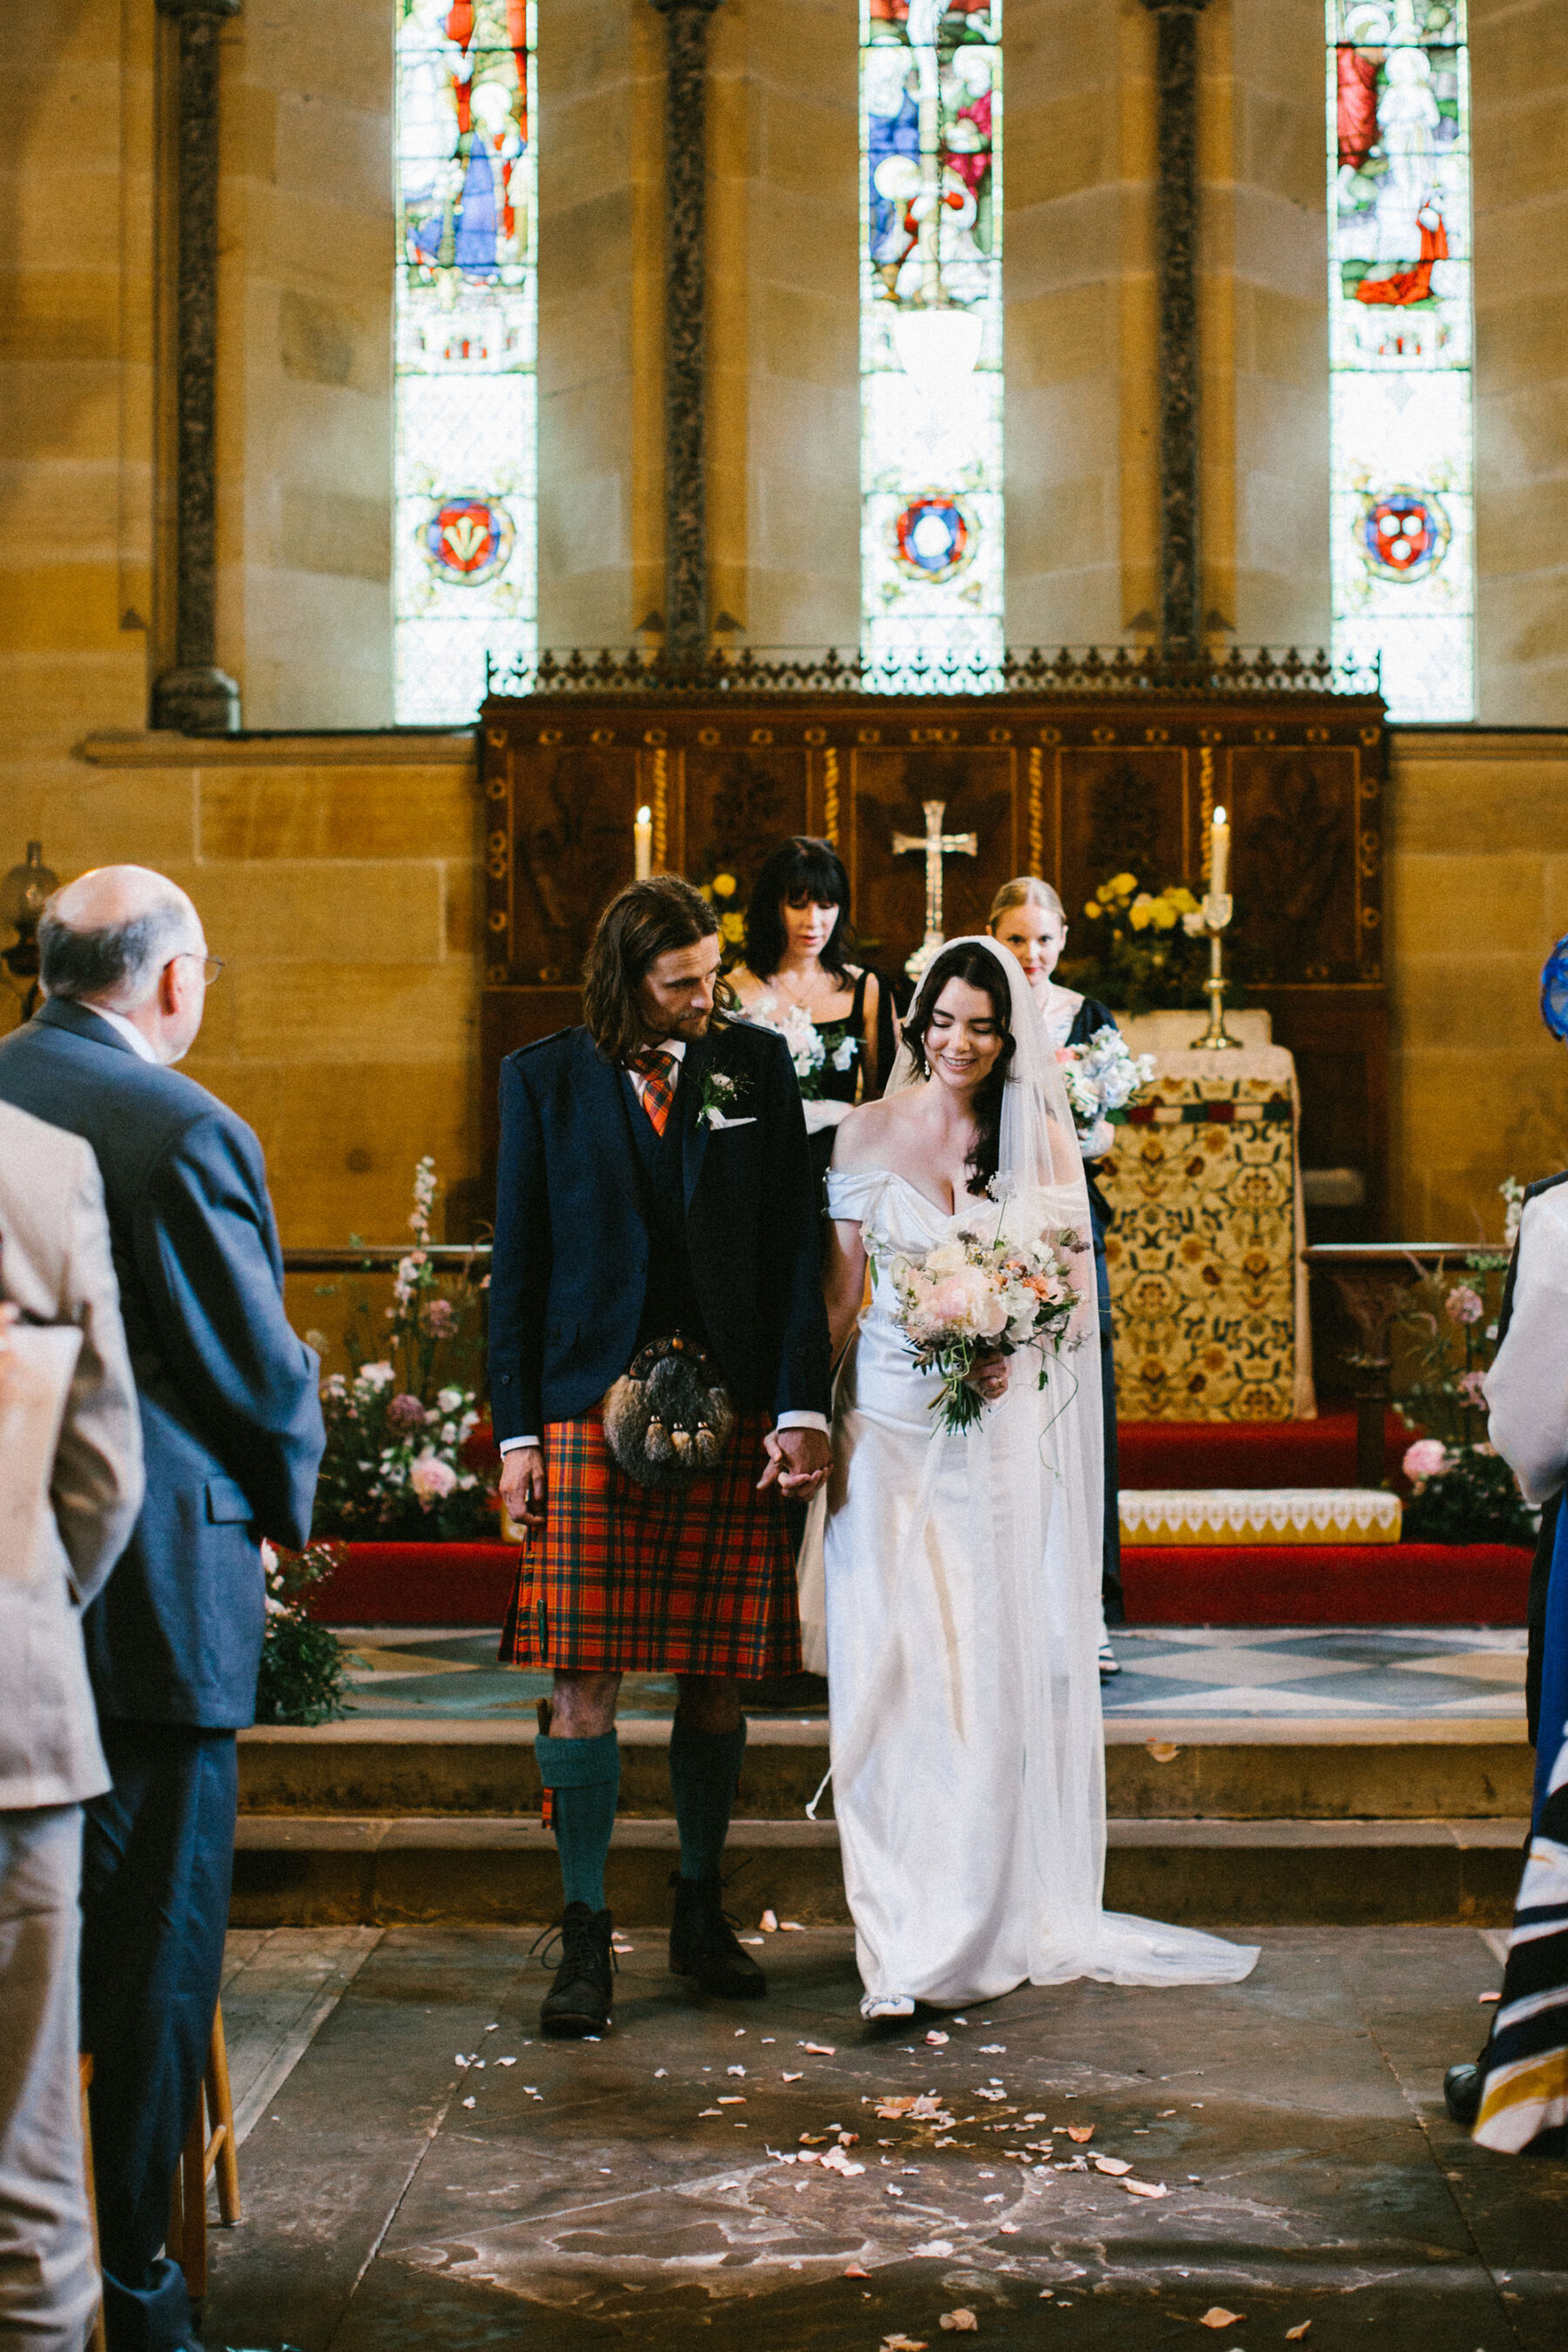 Groom in a red tartan kilt holding hands with his bride in a Vivienne Westwood dress in church.